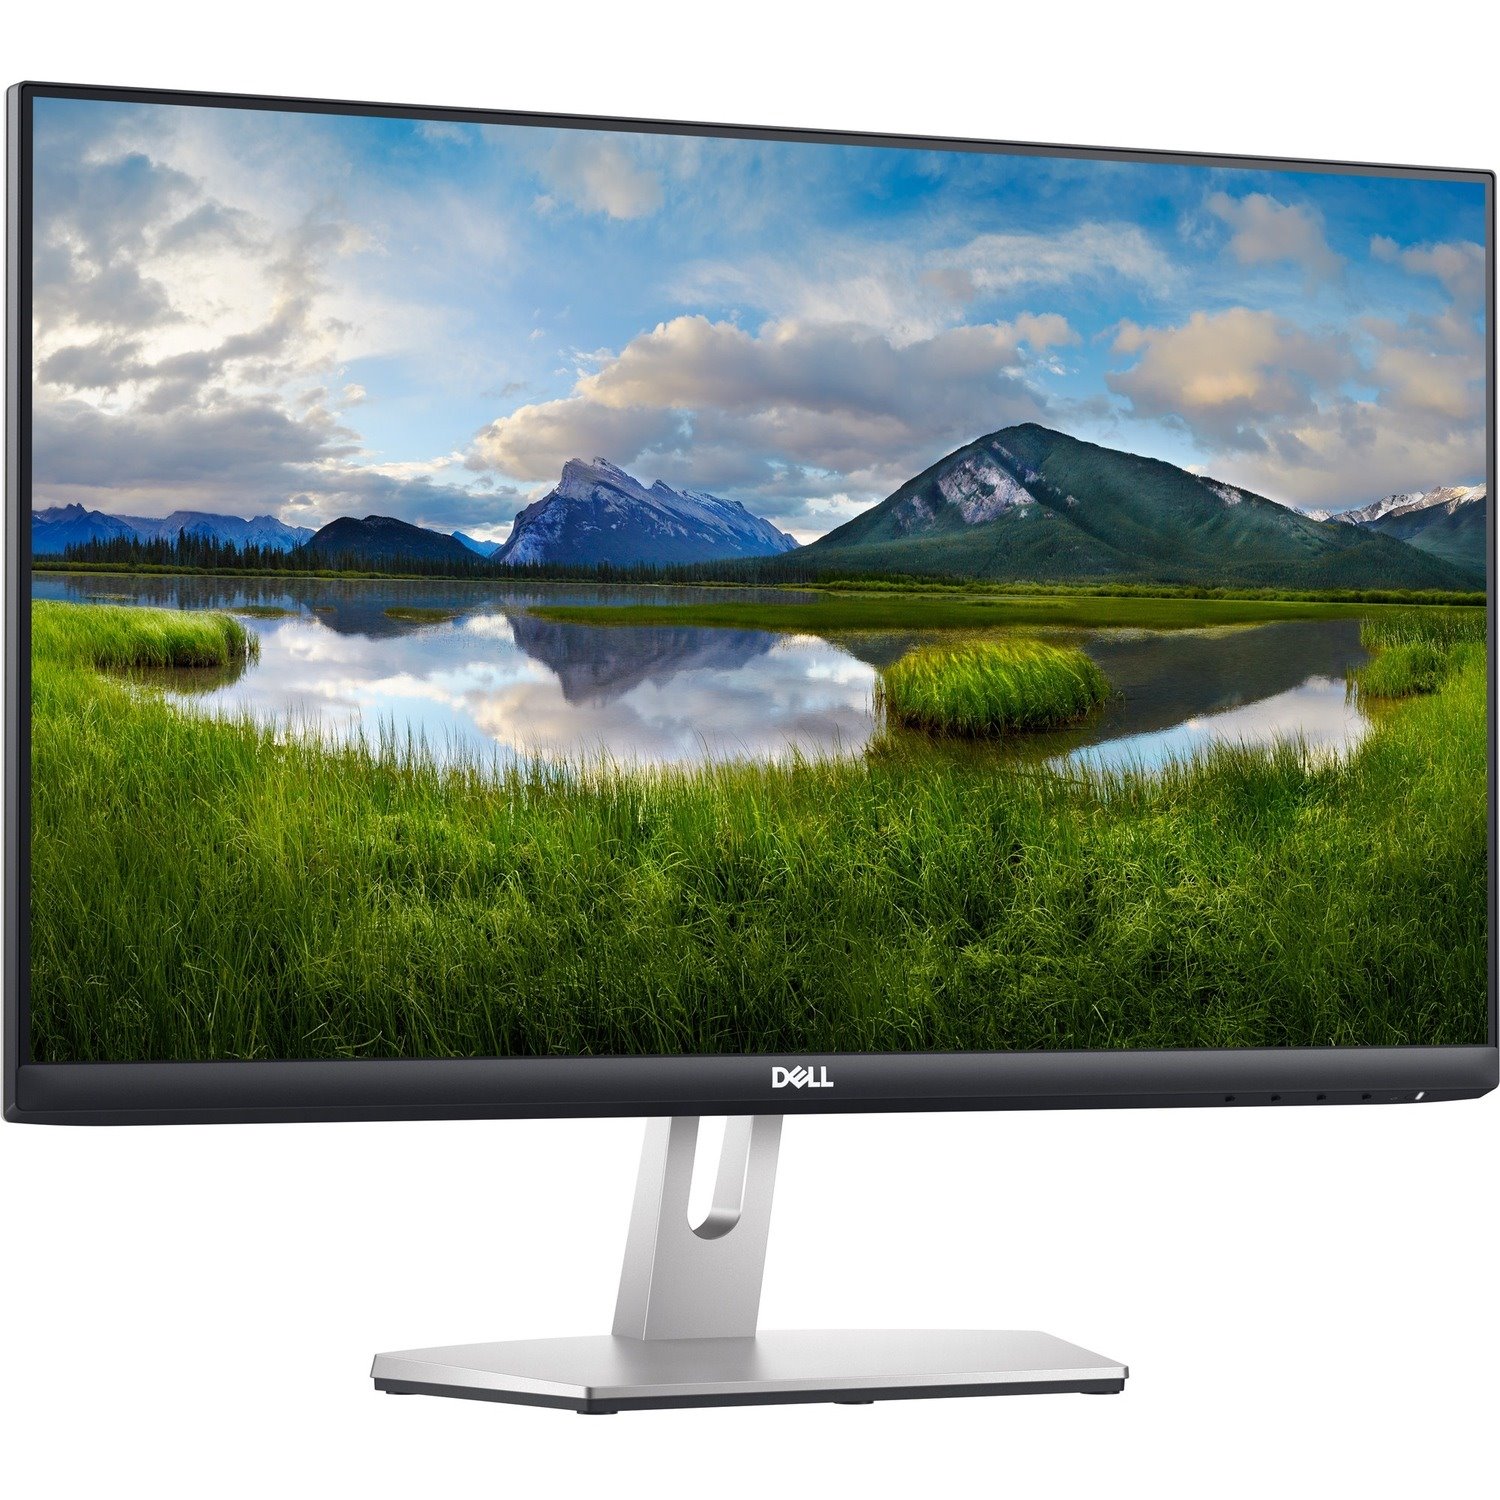 Dell S2421H 24" Class Full HD LCD Monitor - 16:9 - Silver, Grey